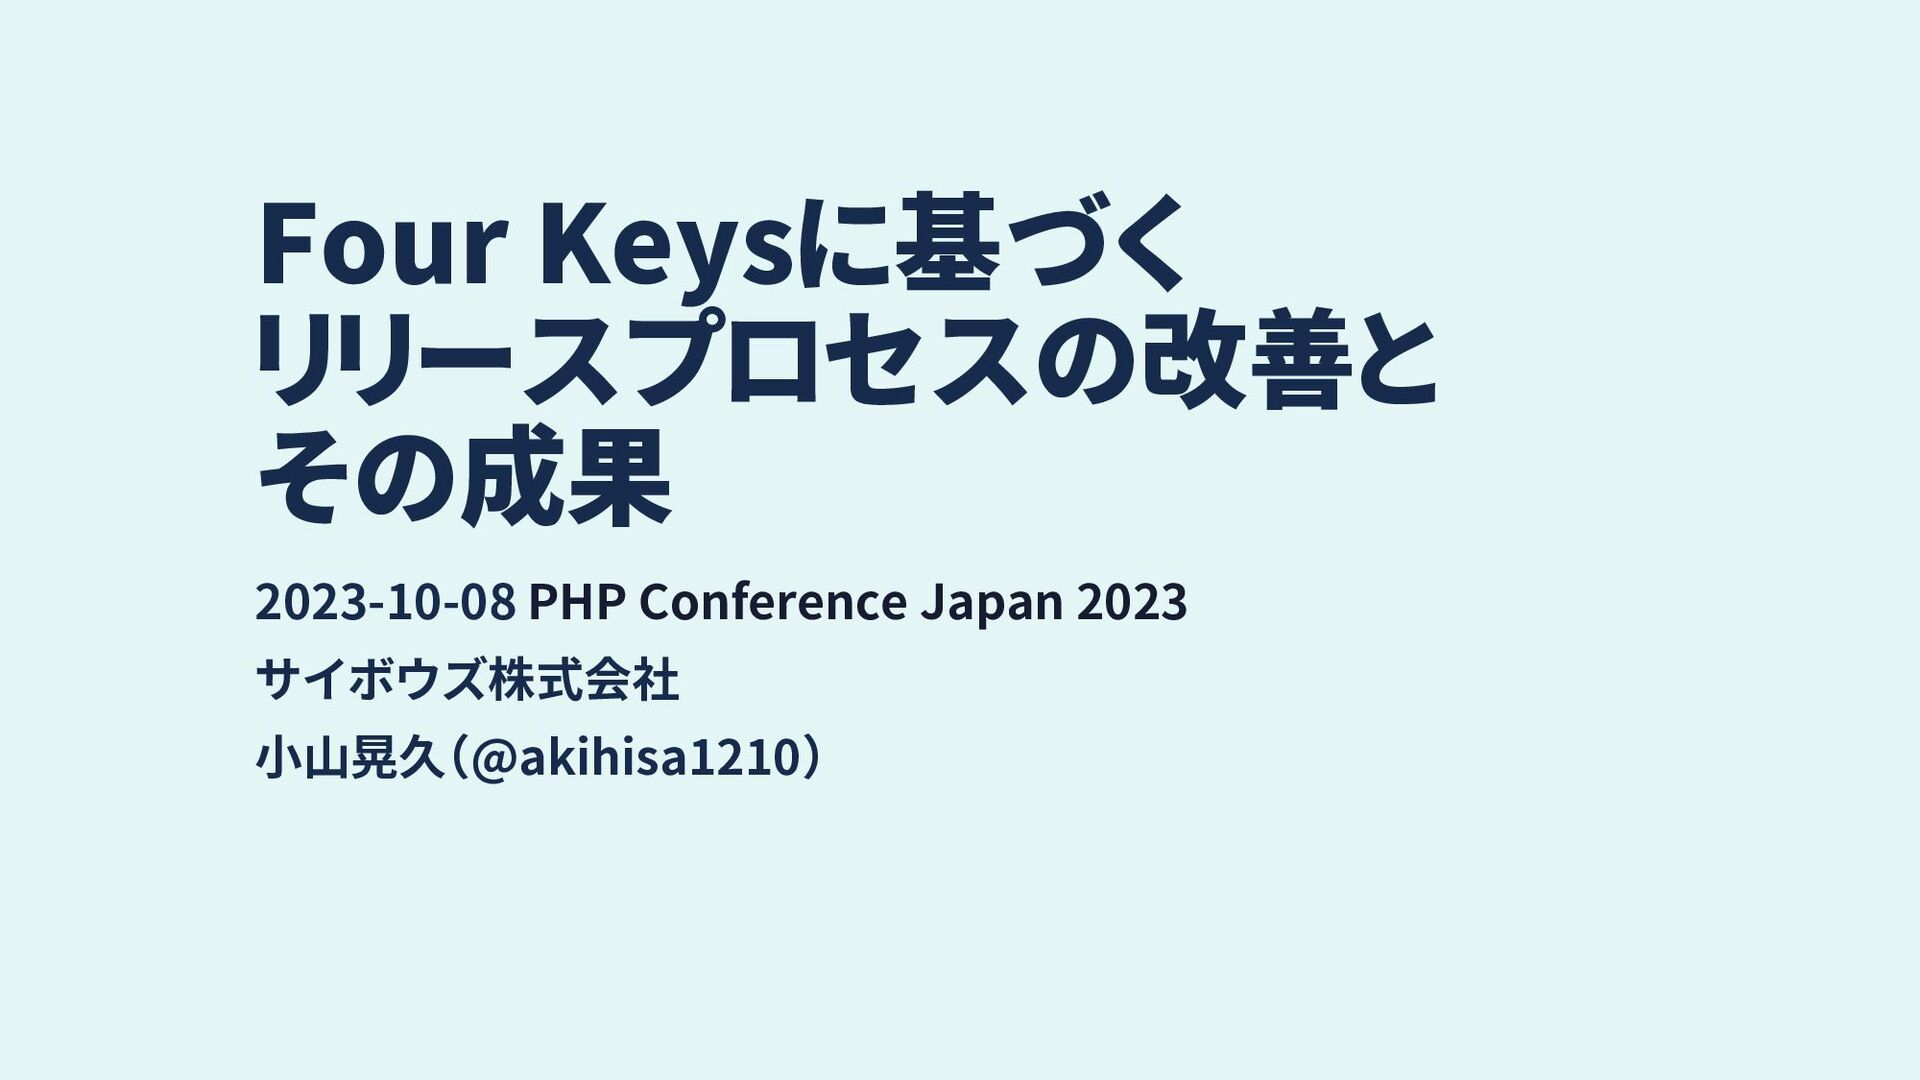 Slide Top: Four Keysに基づくリリースプロセス改善とその成果 / Release process improvement based on the Four Keys and its results